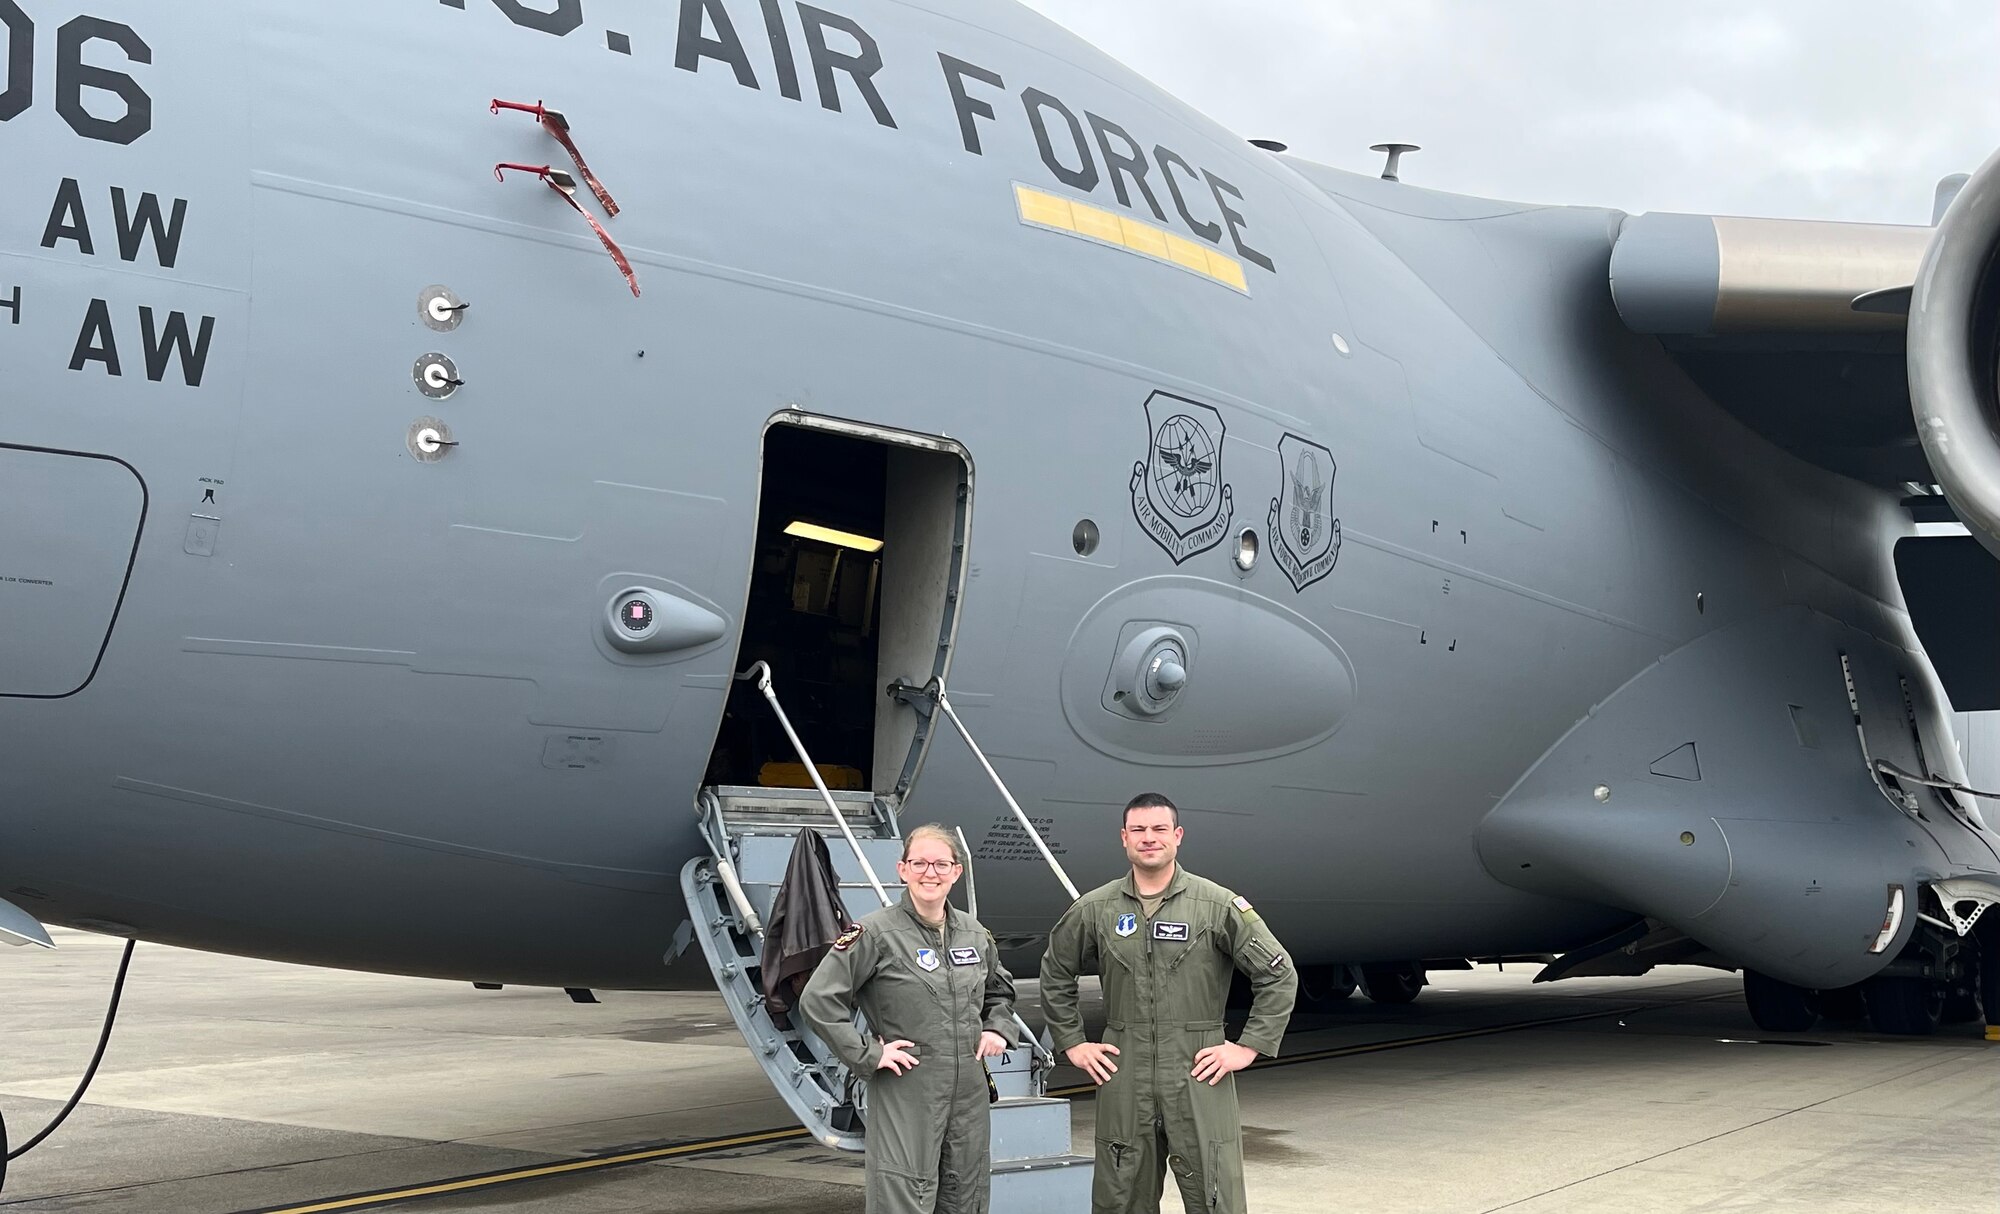 U.S. Air Force Master Sgt. Valerie Stephens, 517th Airlift Squadron operations superintendent, and a servicemember assigned to the 176th Wing, pose in front of a C-17 Globemaster III at Joint Base Elmendorf-Richardson, Alaska.